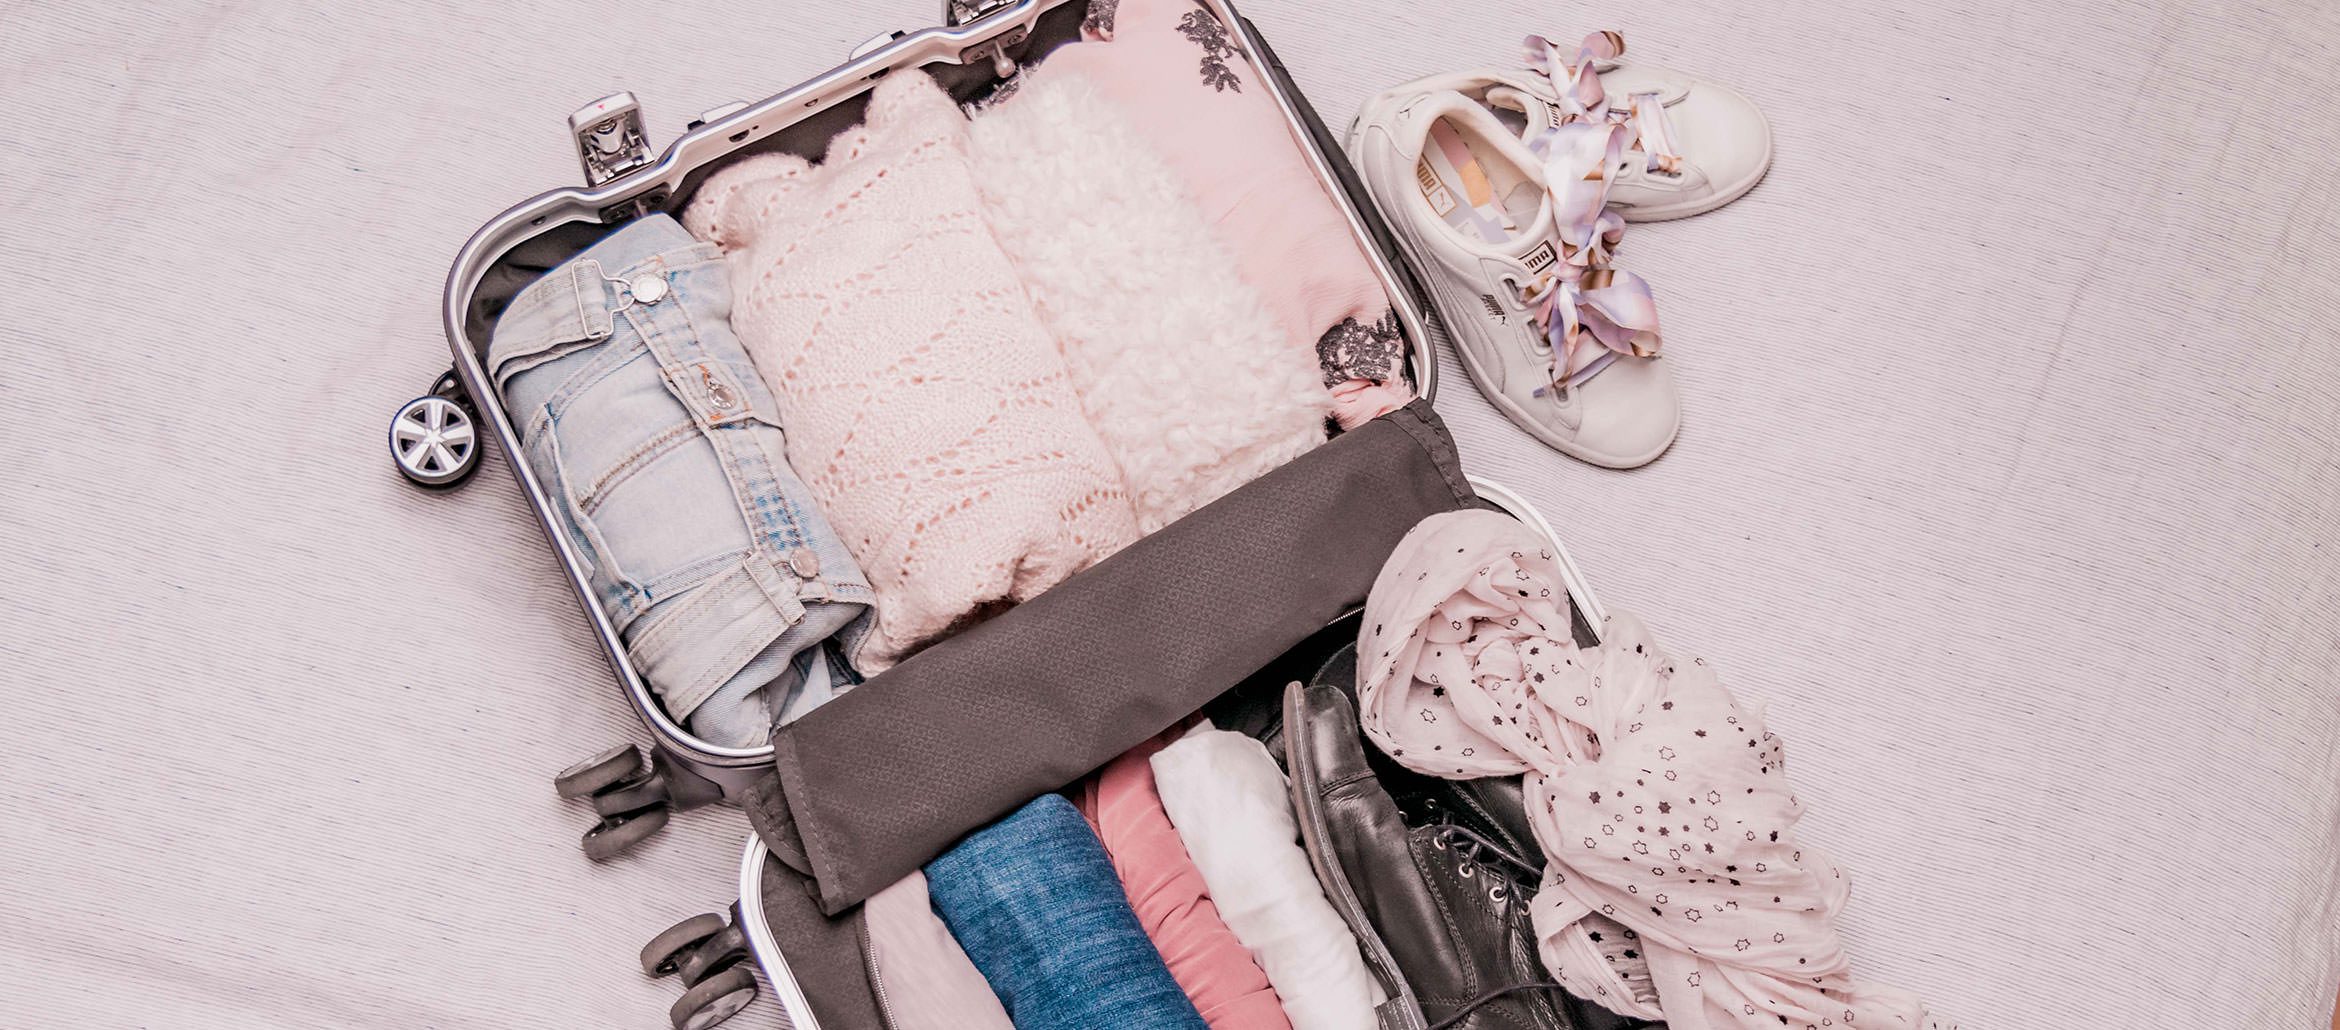 Our Copenhagen capsule wardrobe, all zipped up and ready to fly